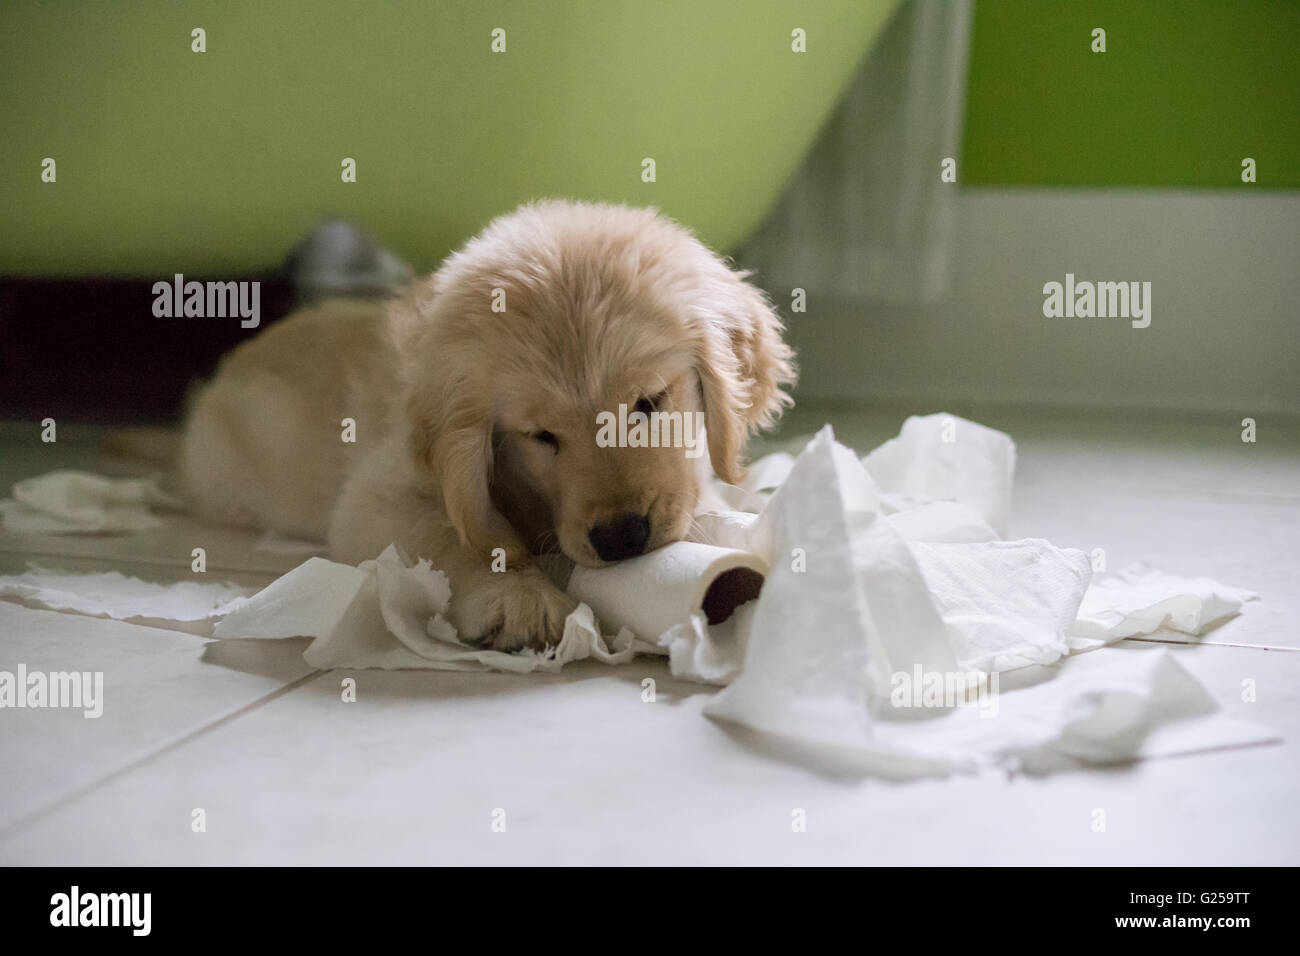 Golden retriever puppy dog playing with toilet roll in bathroom Stock Photo